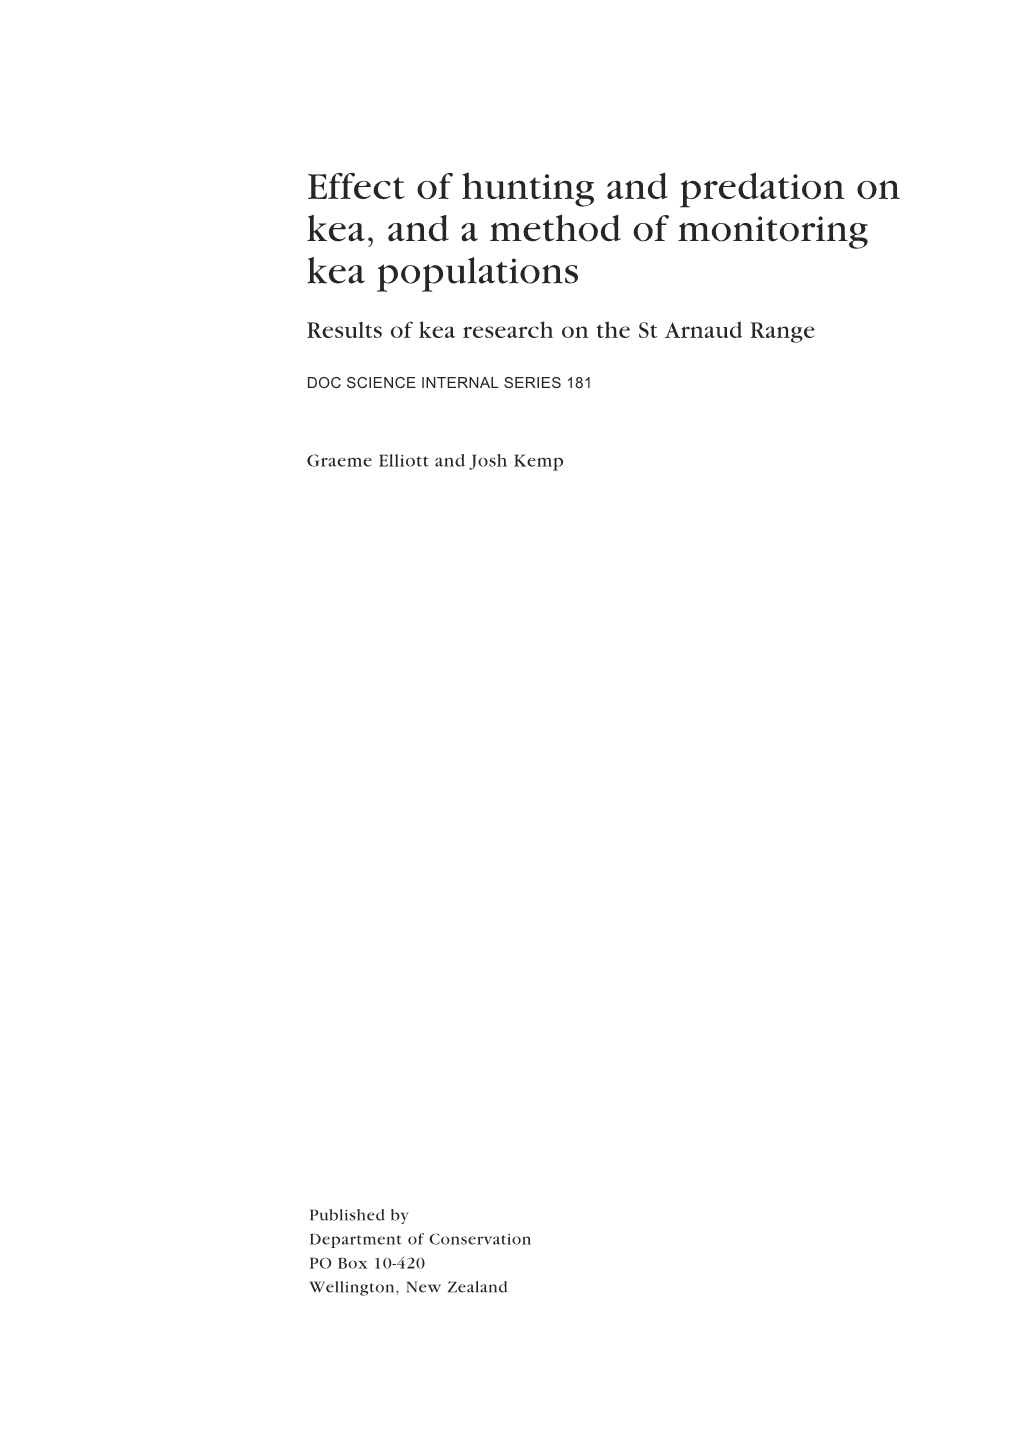 Effect of Hunting and Predation on Kea, and a Method of Monitoring Kea Populations